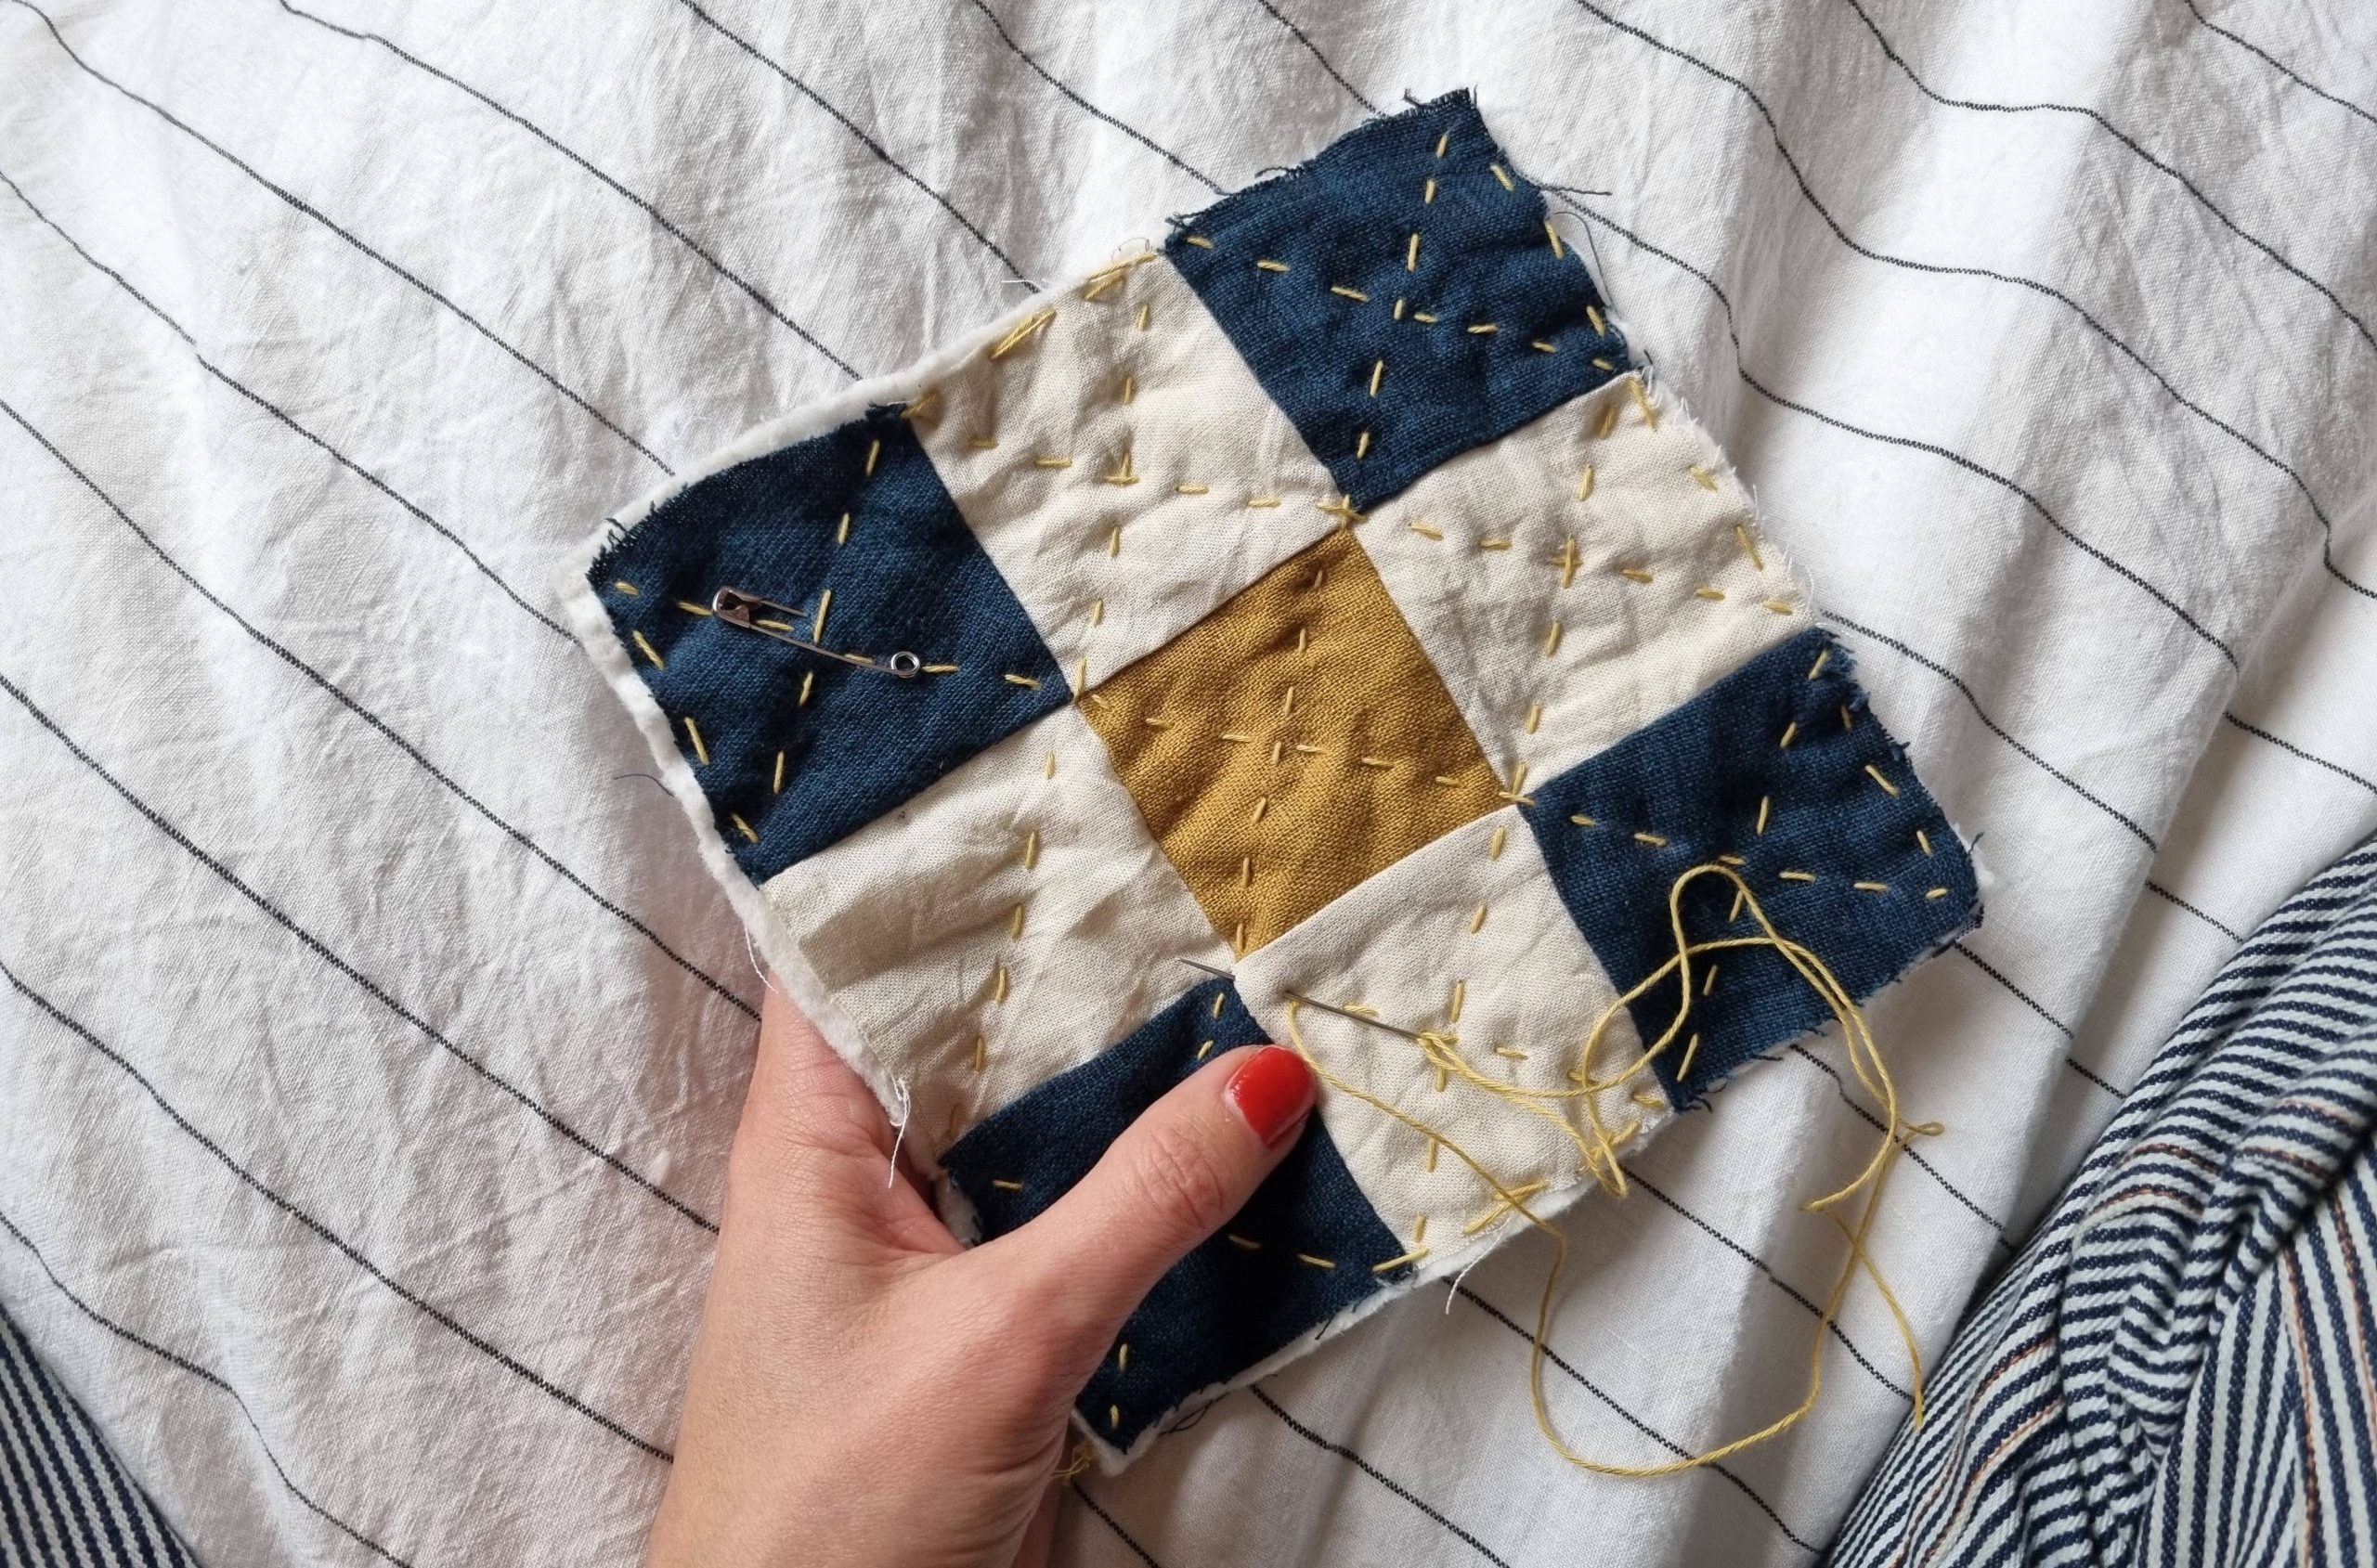 Beginner's Quilting: Attaching quilt wadding and backing